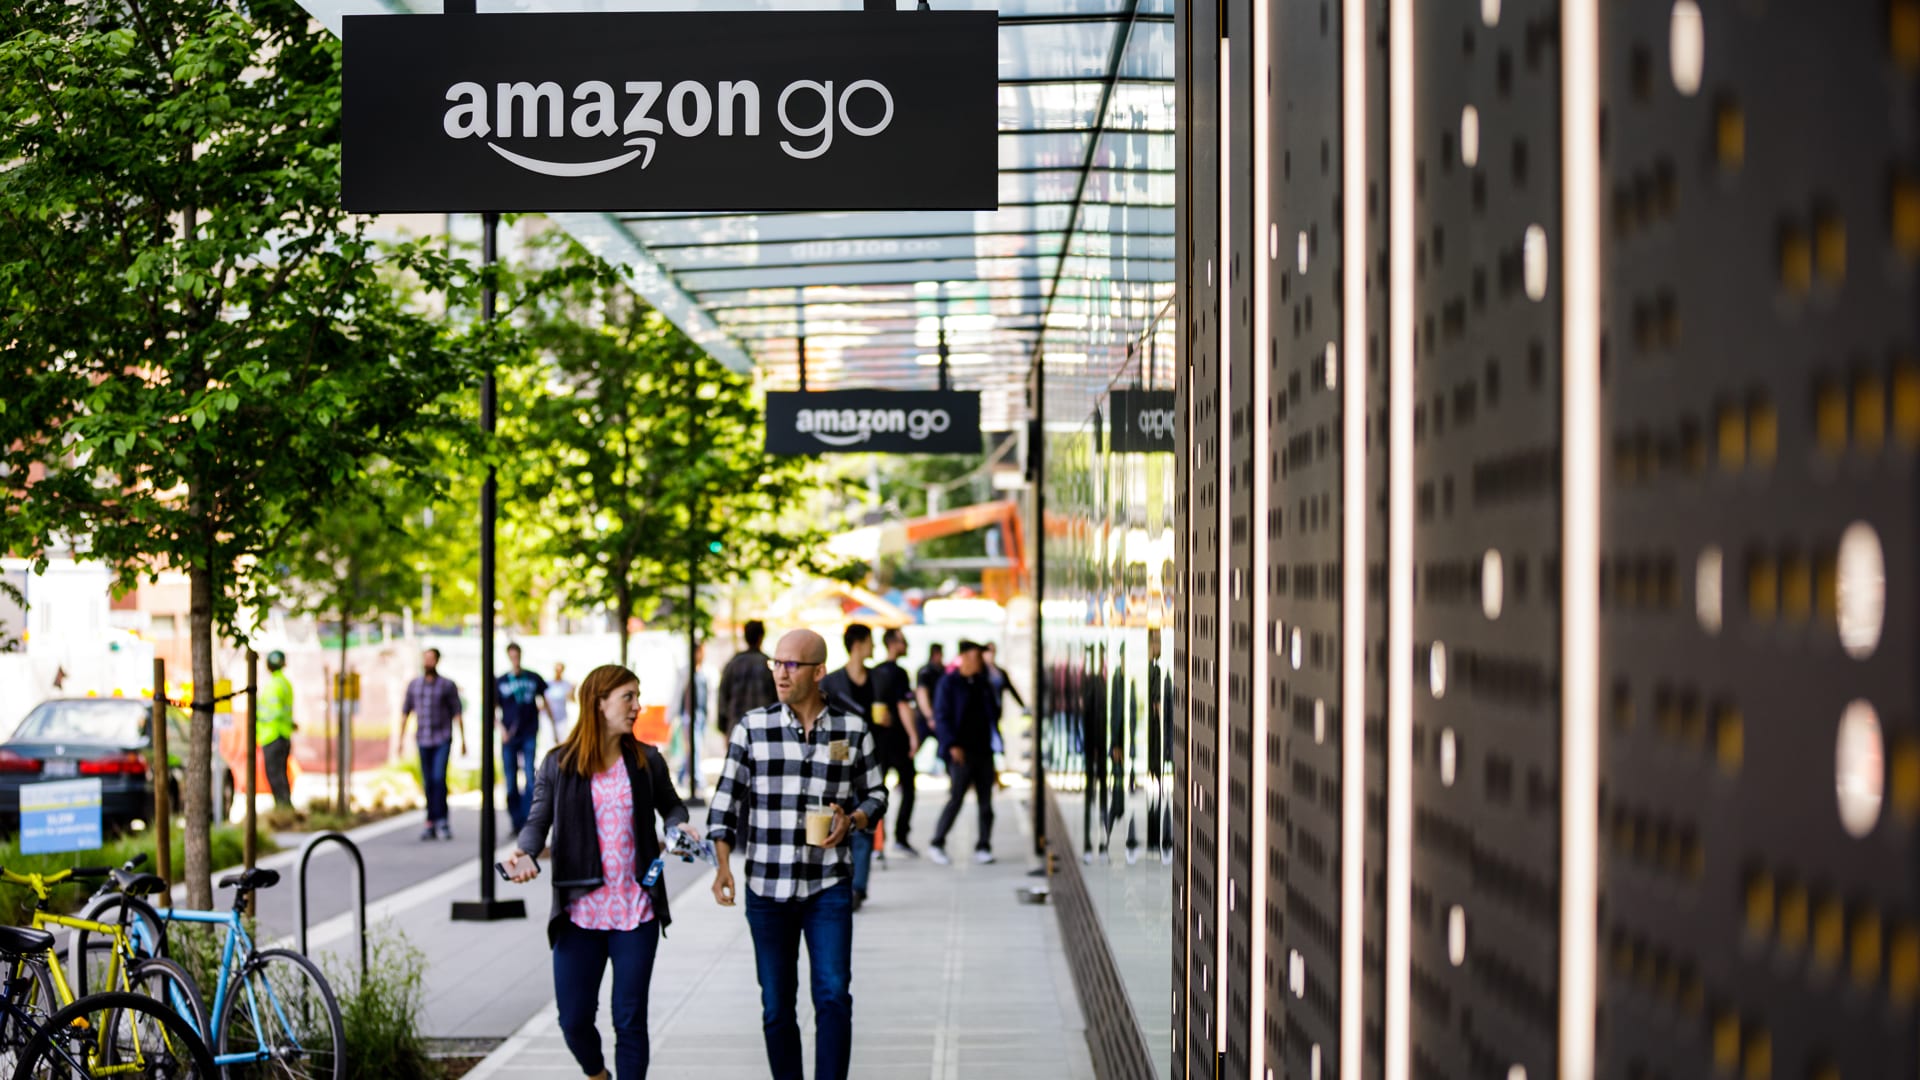 Amazon looks to airports for cashier-less stores: report